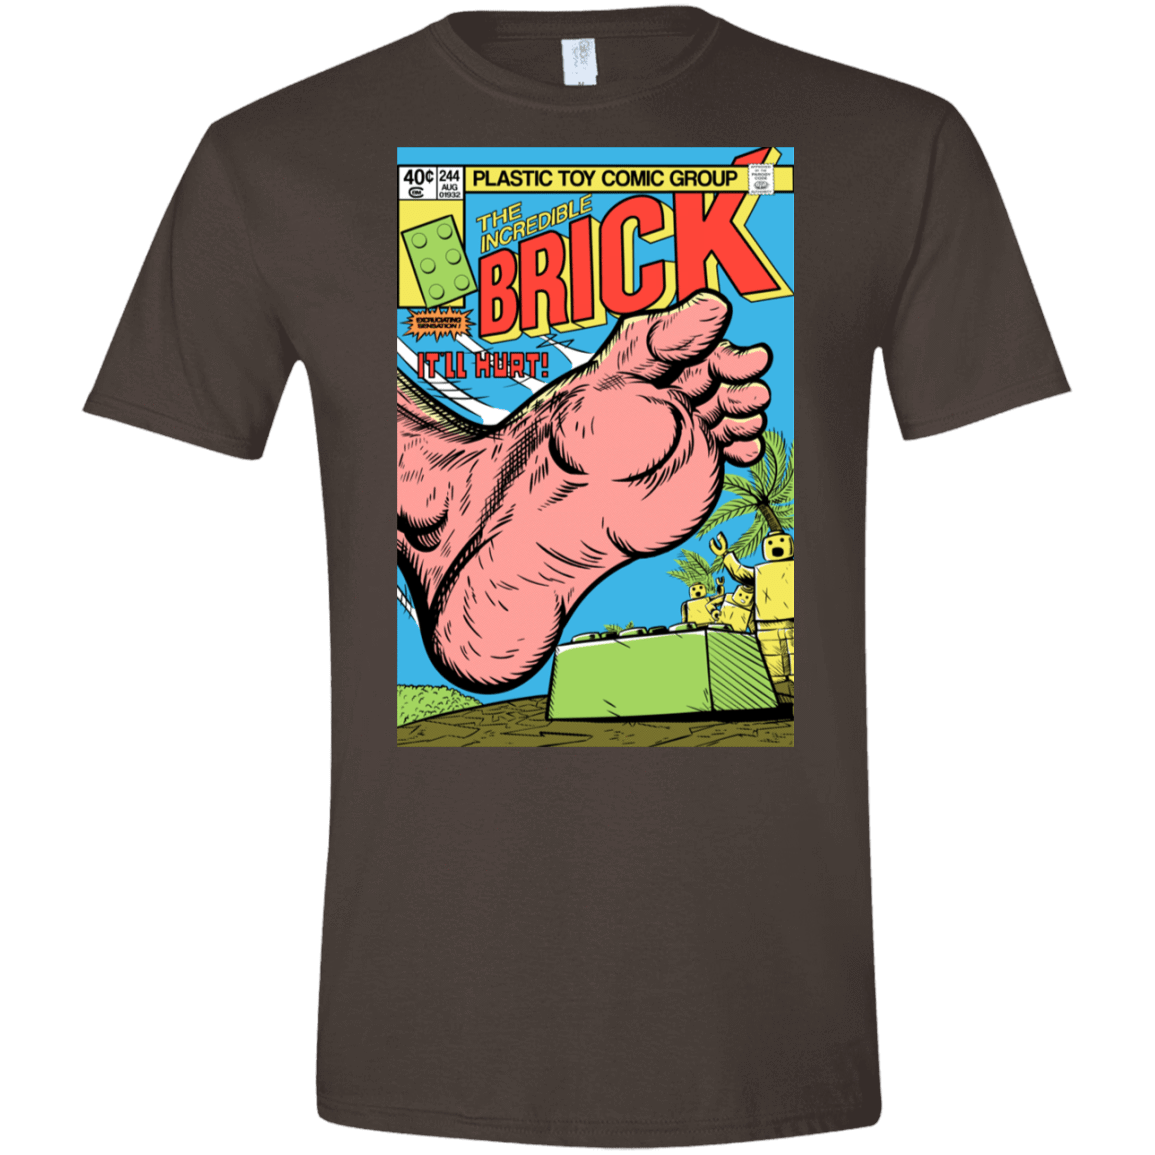 T-Shirts Dark Chocolate / S The Incredible Brick Men's Semi-Fitted Softstyle